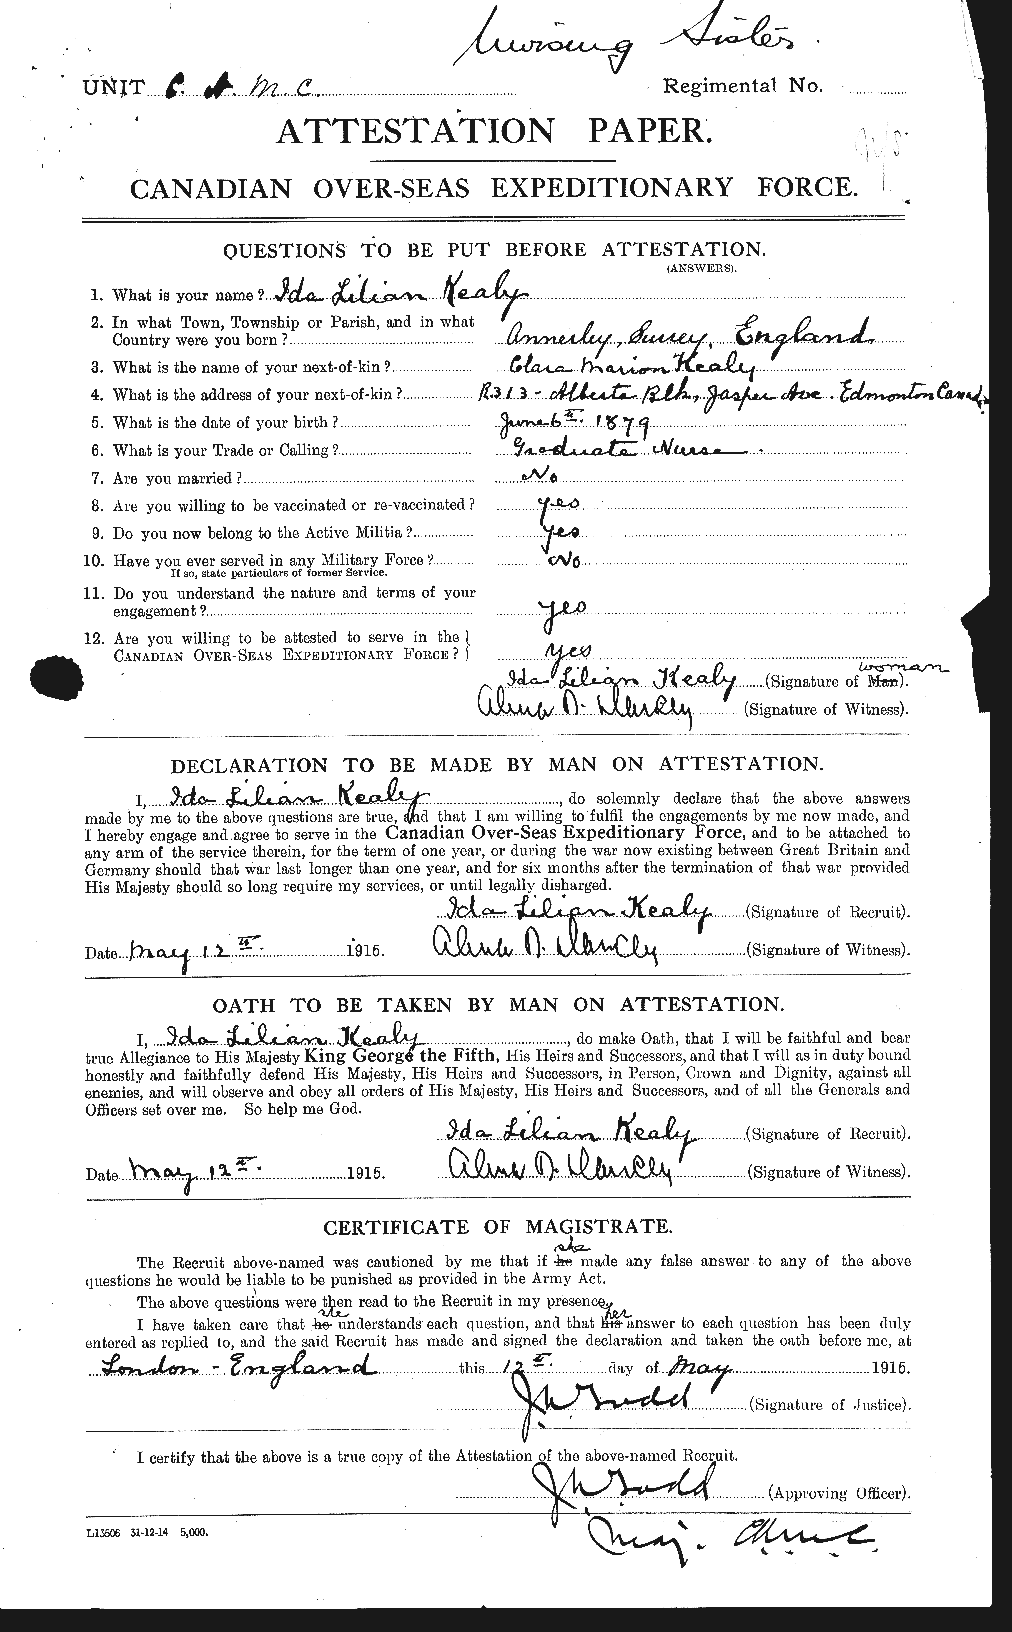 Personnel Records of the First World War - CEF 237299a